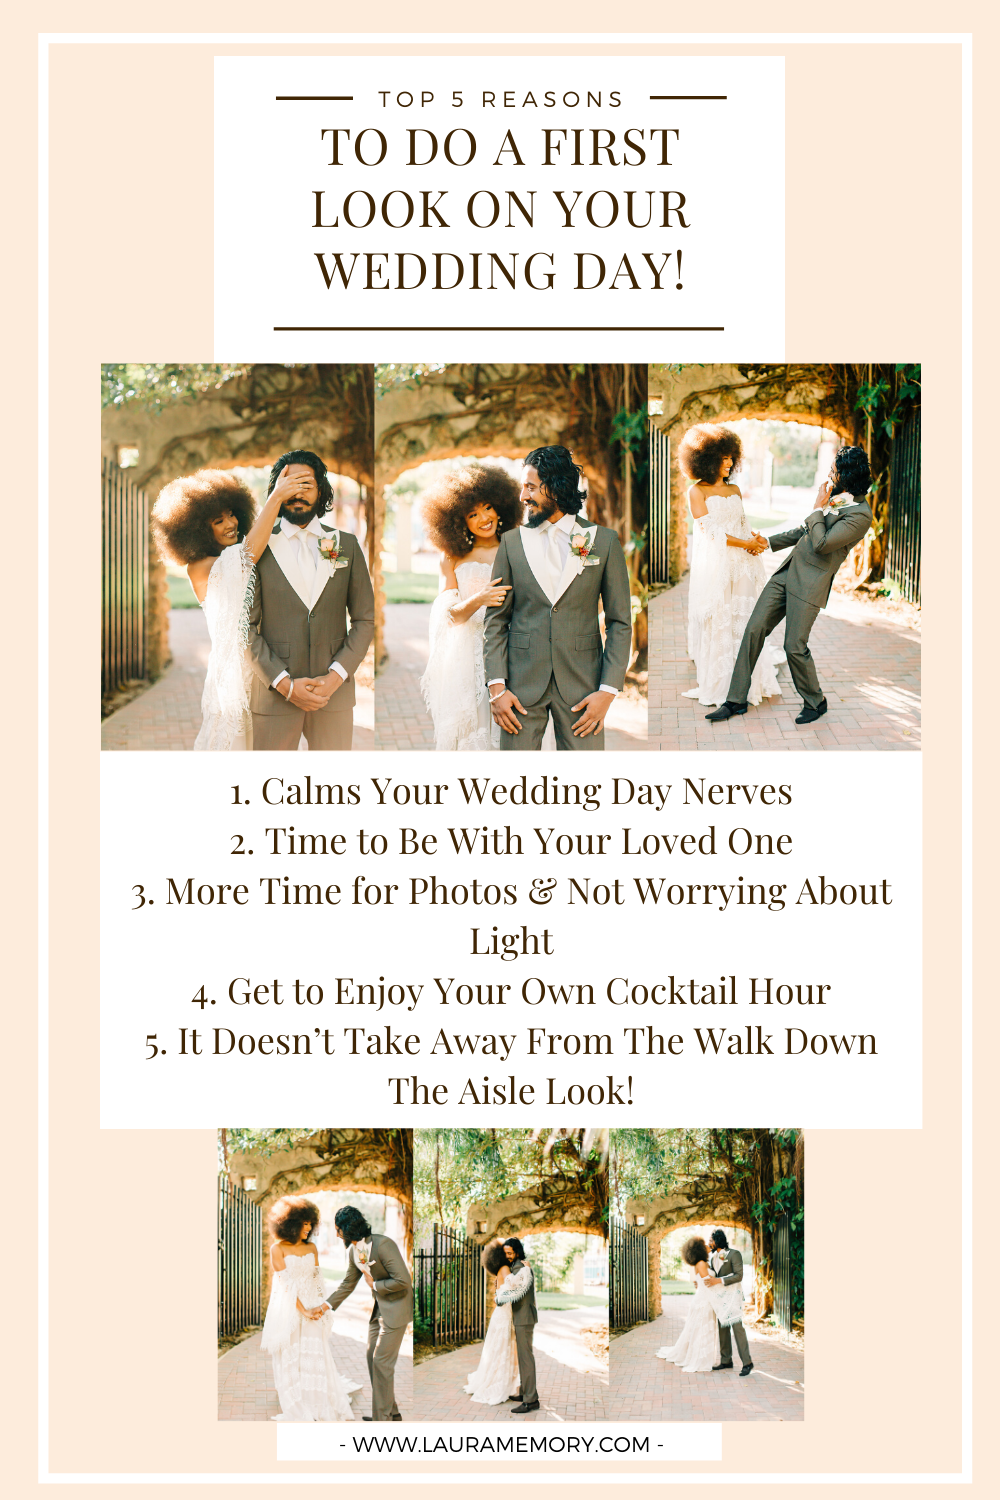 First Look on Wedding Day - Why you should do a first look on your wedding day